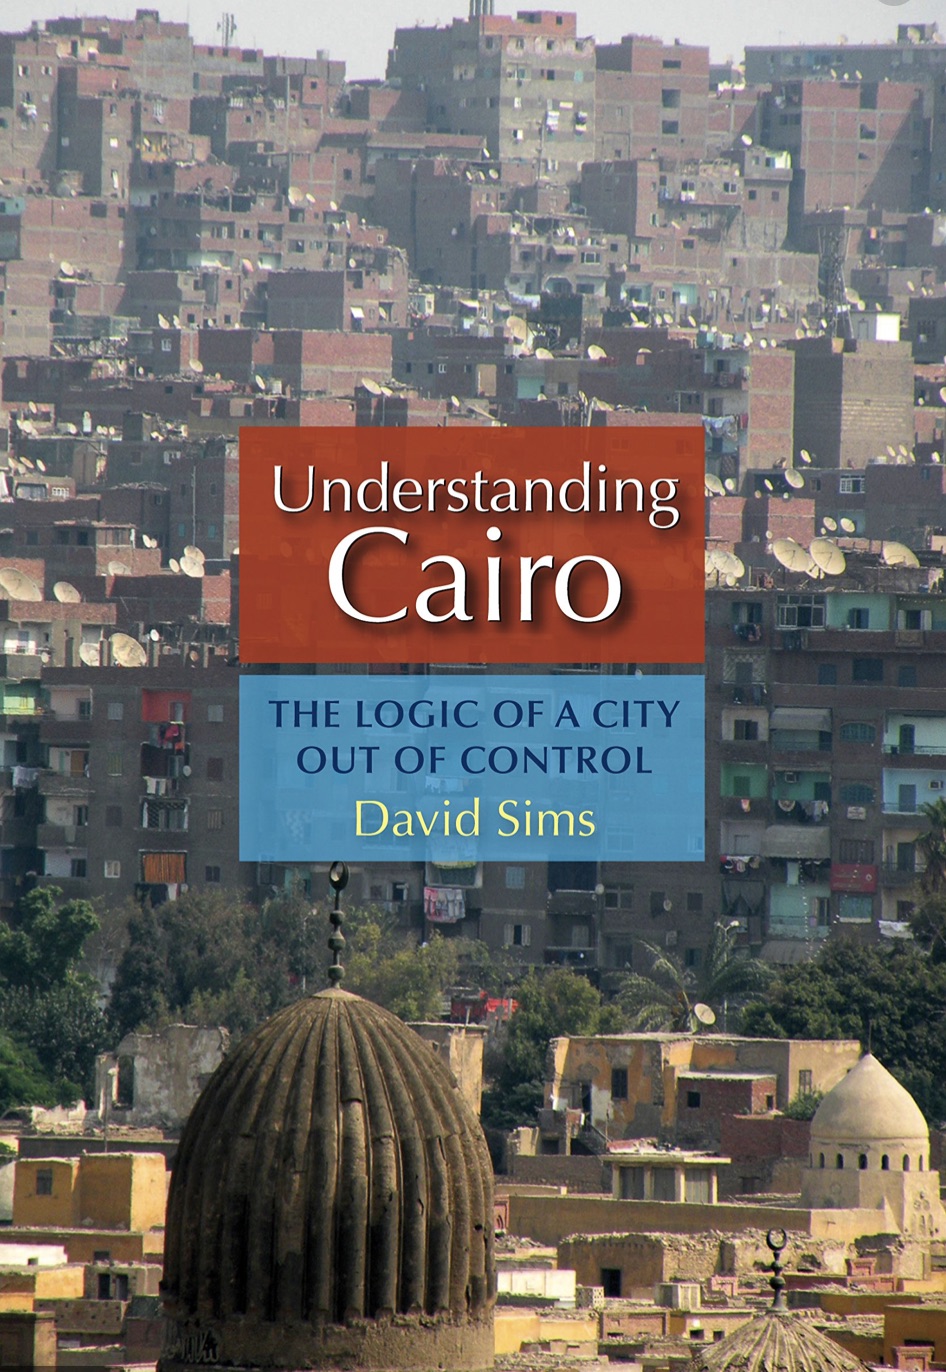  Understanding Cairo: The Logic of a City out of Control- Buchrezension